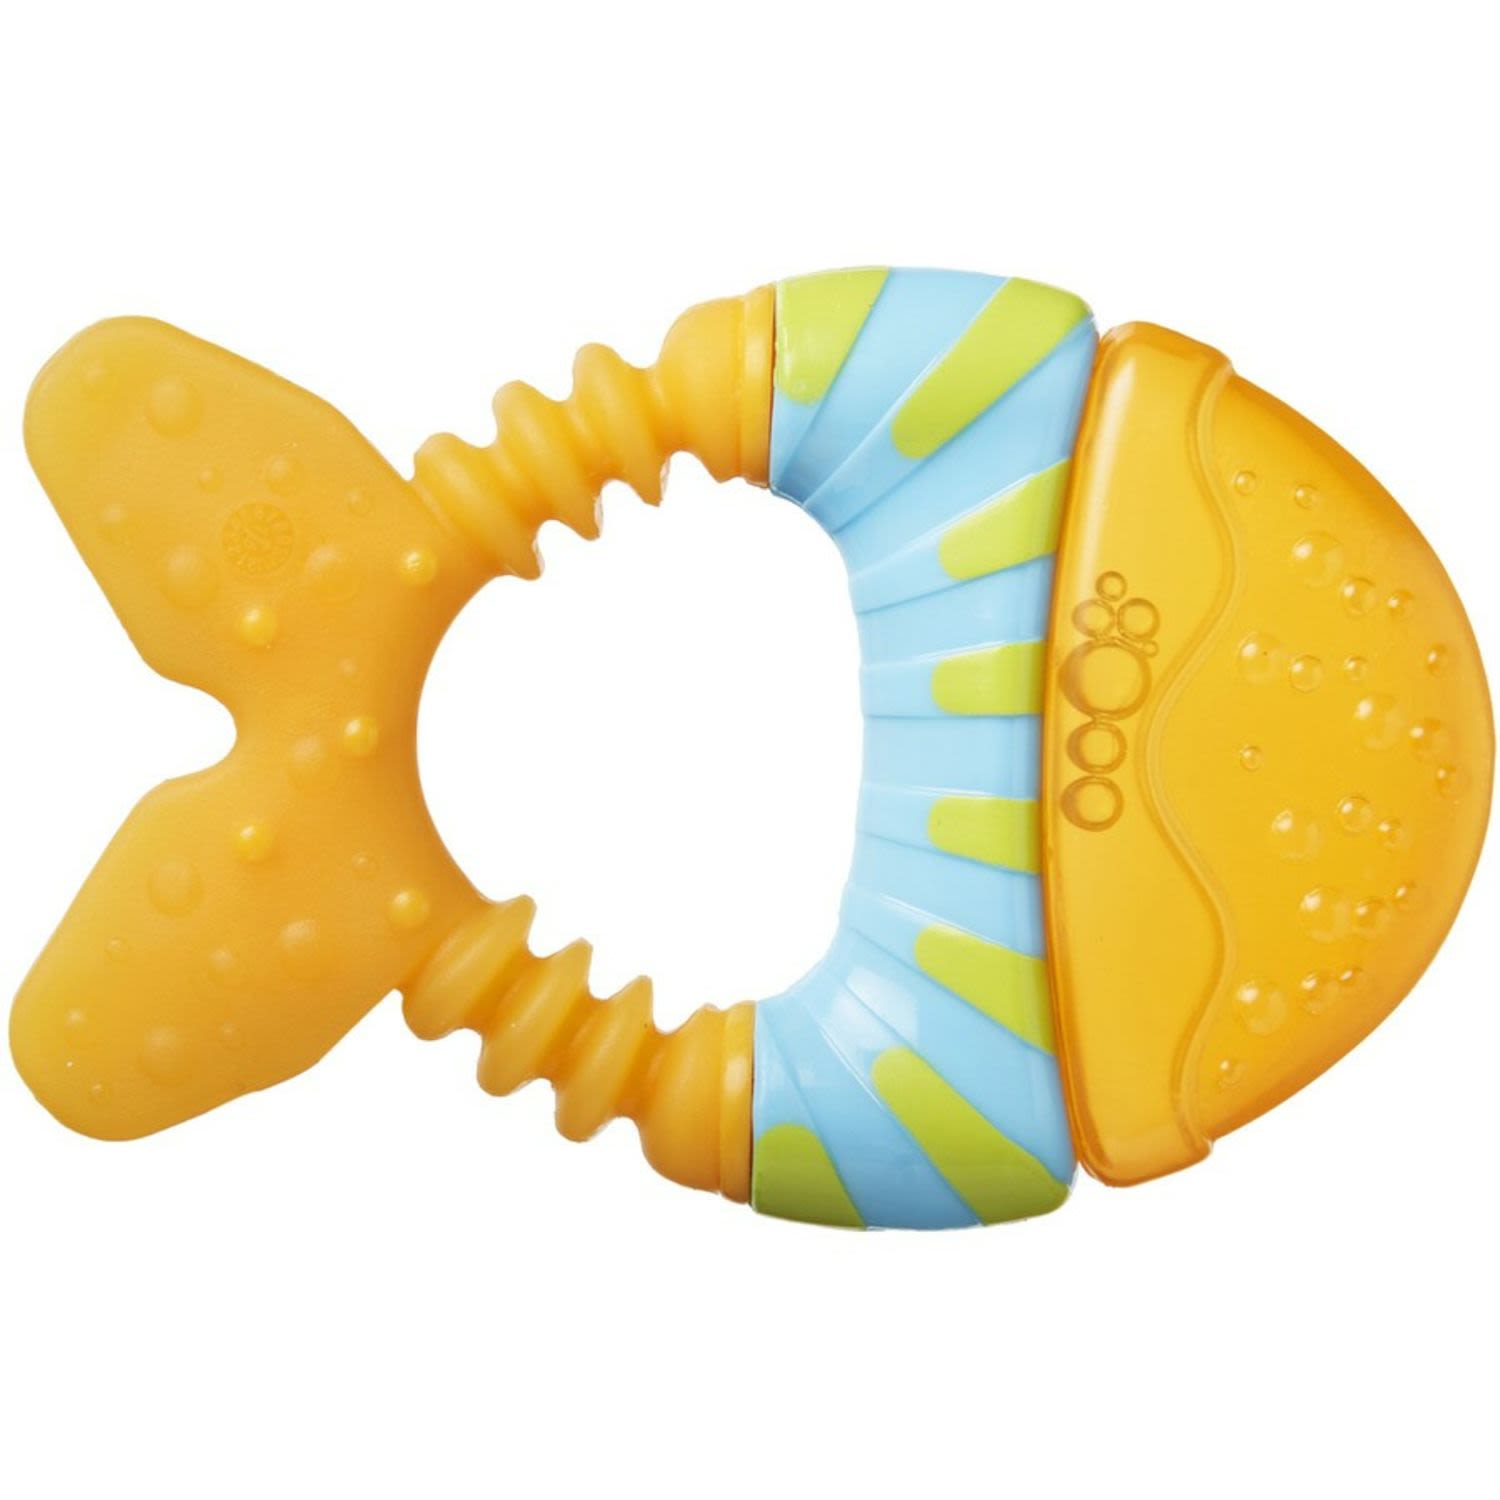 Tommee Tippee Cool Fish Teether, 1 Each